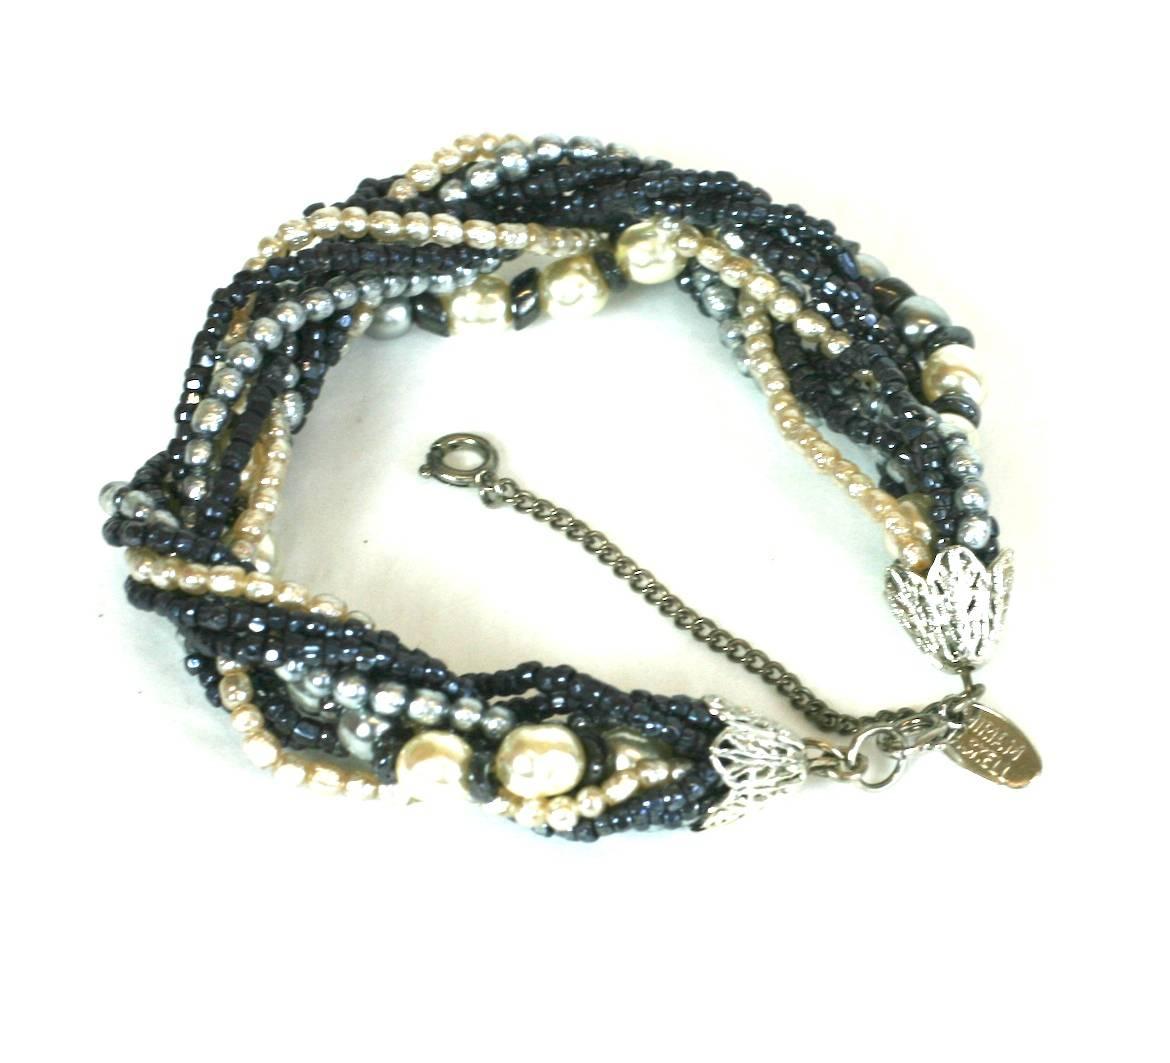 Miriam Haskell Grey and Cream faux pearl bracelet with jet seed beads. Braided of differing sizes and colors for an interesting dimensional effect. 
1950's USA. Safety chain as well, *' x 1